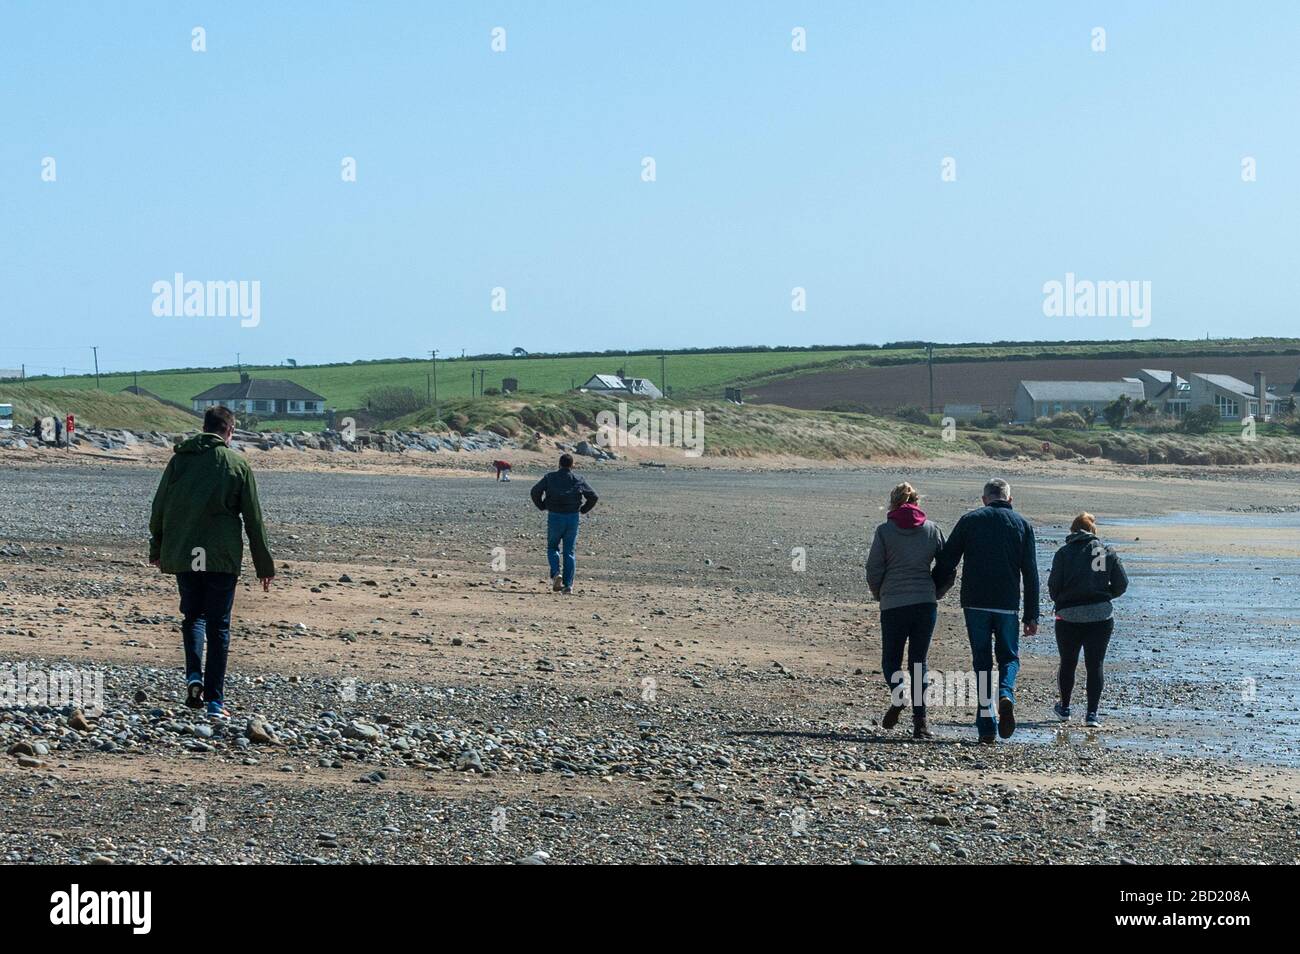 Garrettstown, West Cork, Ireland. 6th Apr, 2020. People were on the beach at Garrettstown today and most were observing the Government's social distancing guidelines issued due to the Covid-19 pandemic. Credit: Andy Gibson/Alamy Live News Stock Photo